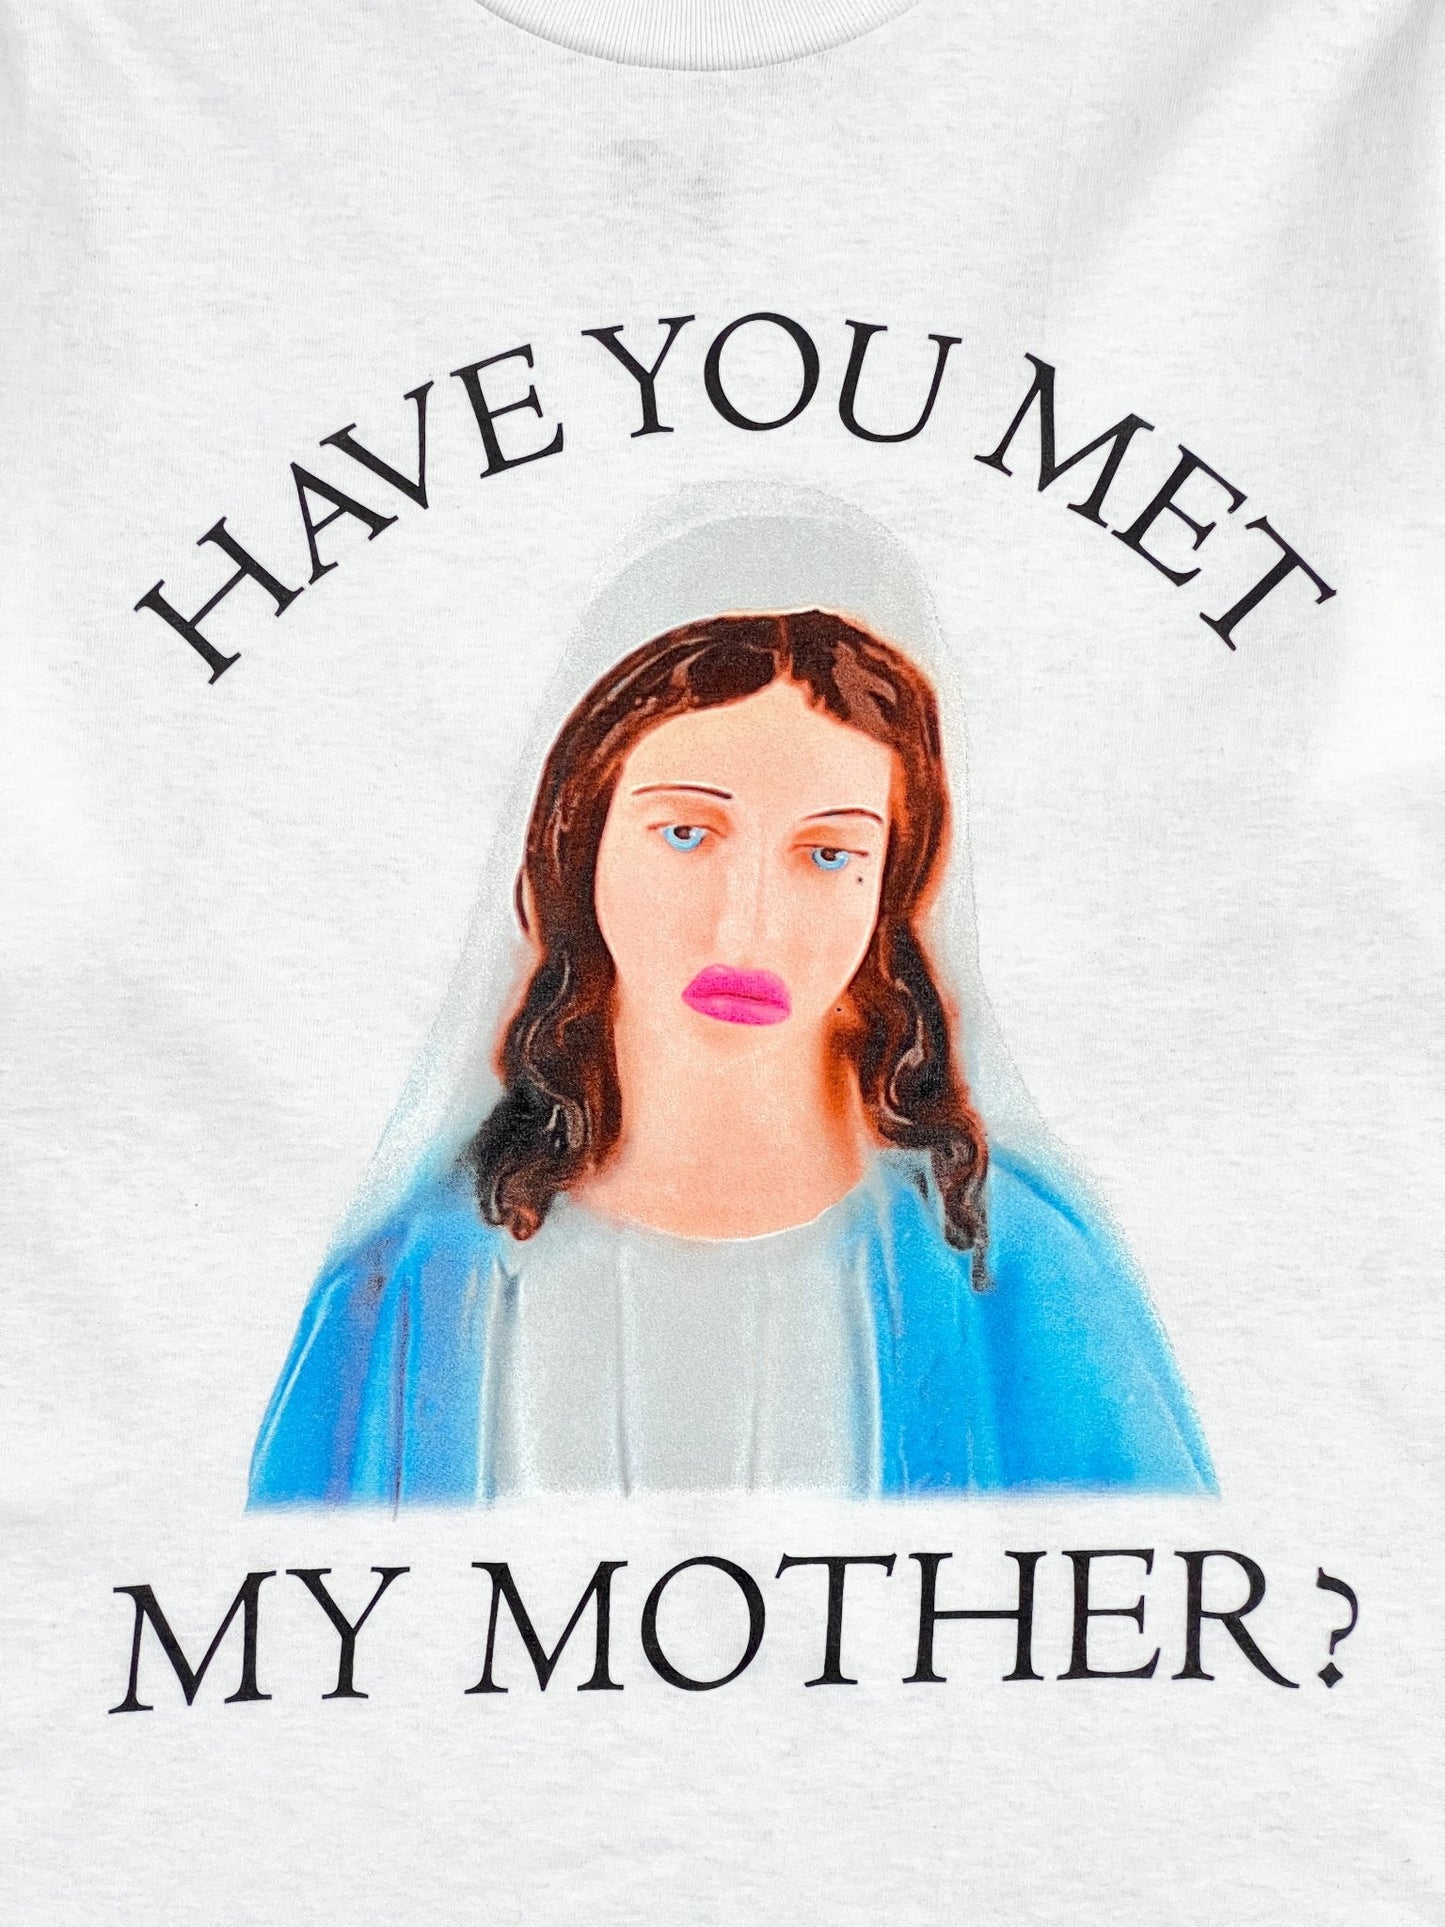 Have you met my PLEASURES MOTHER T-SHIRT WHITE graphic t-shirt?